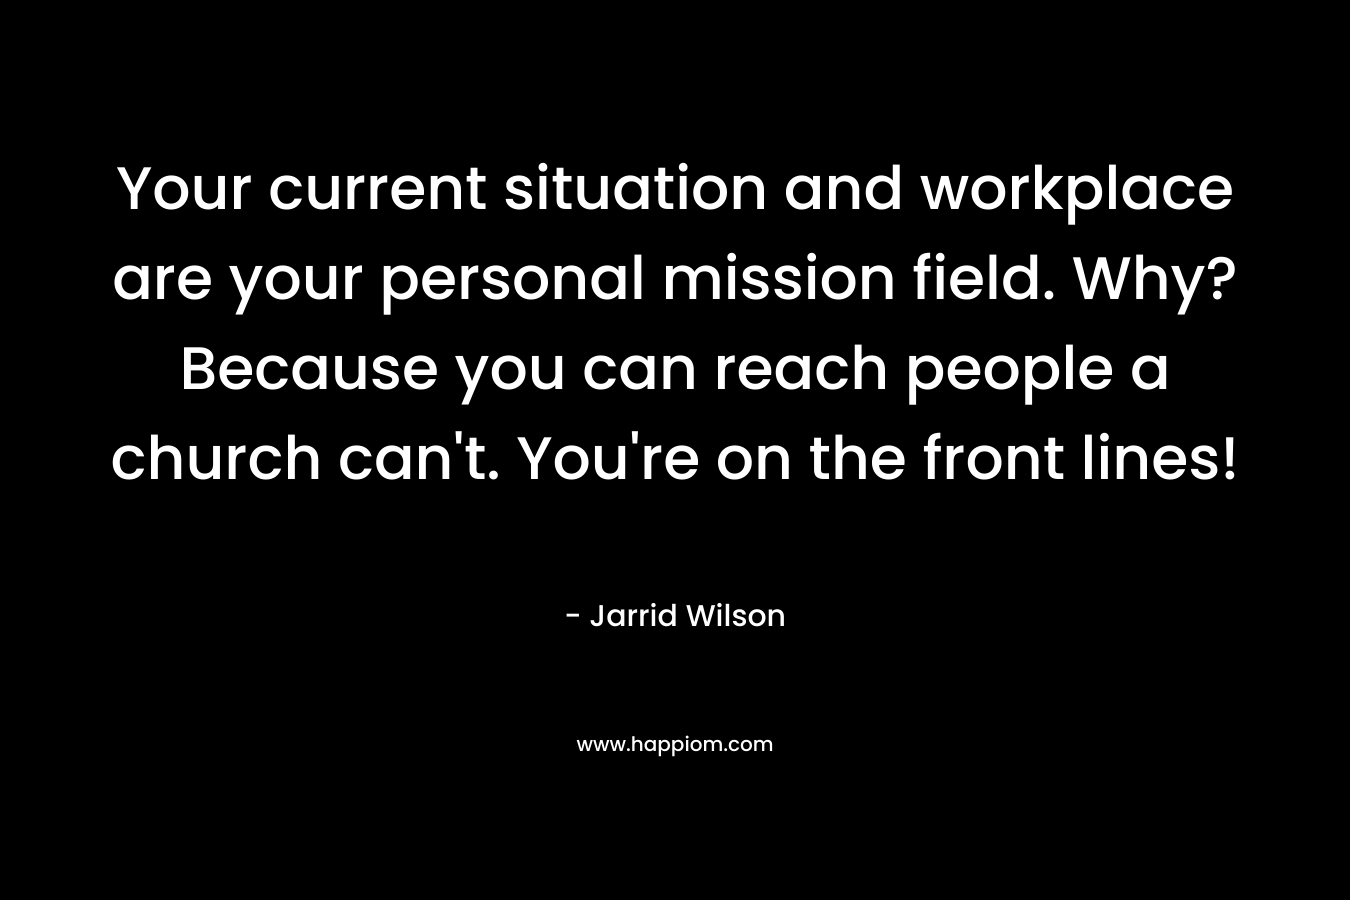 Your current situation and workplace are your personal mission field. Why? Because you can reach people a church can’t. You’re on the front lines! – Jarrid Wilson